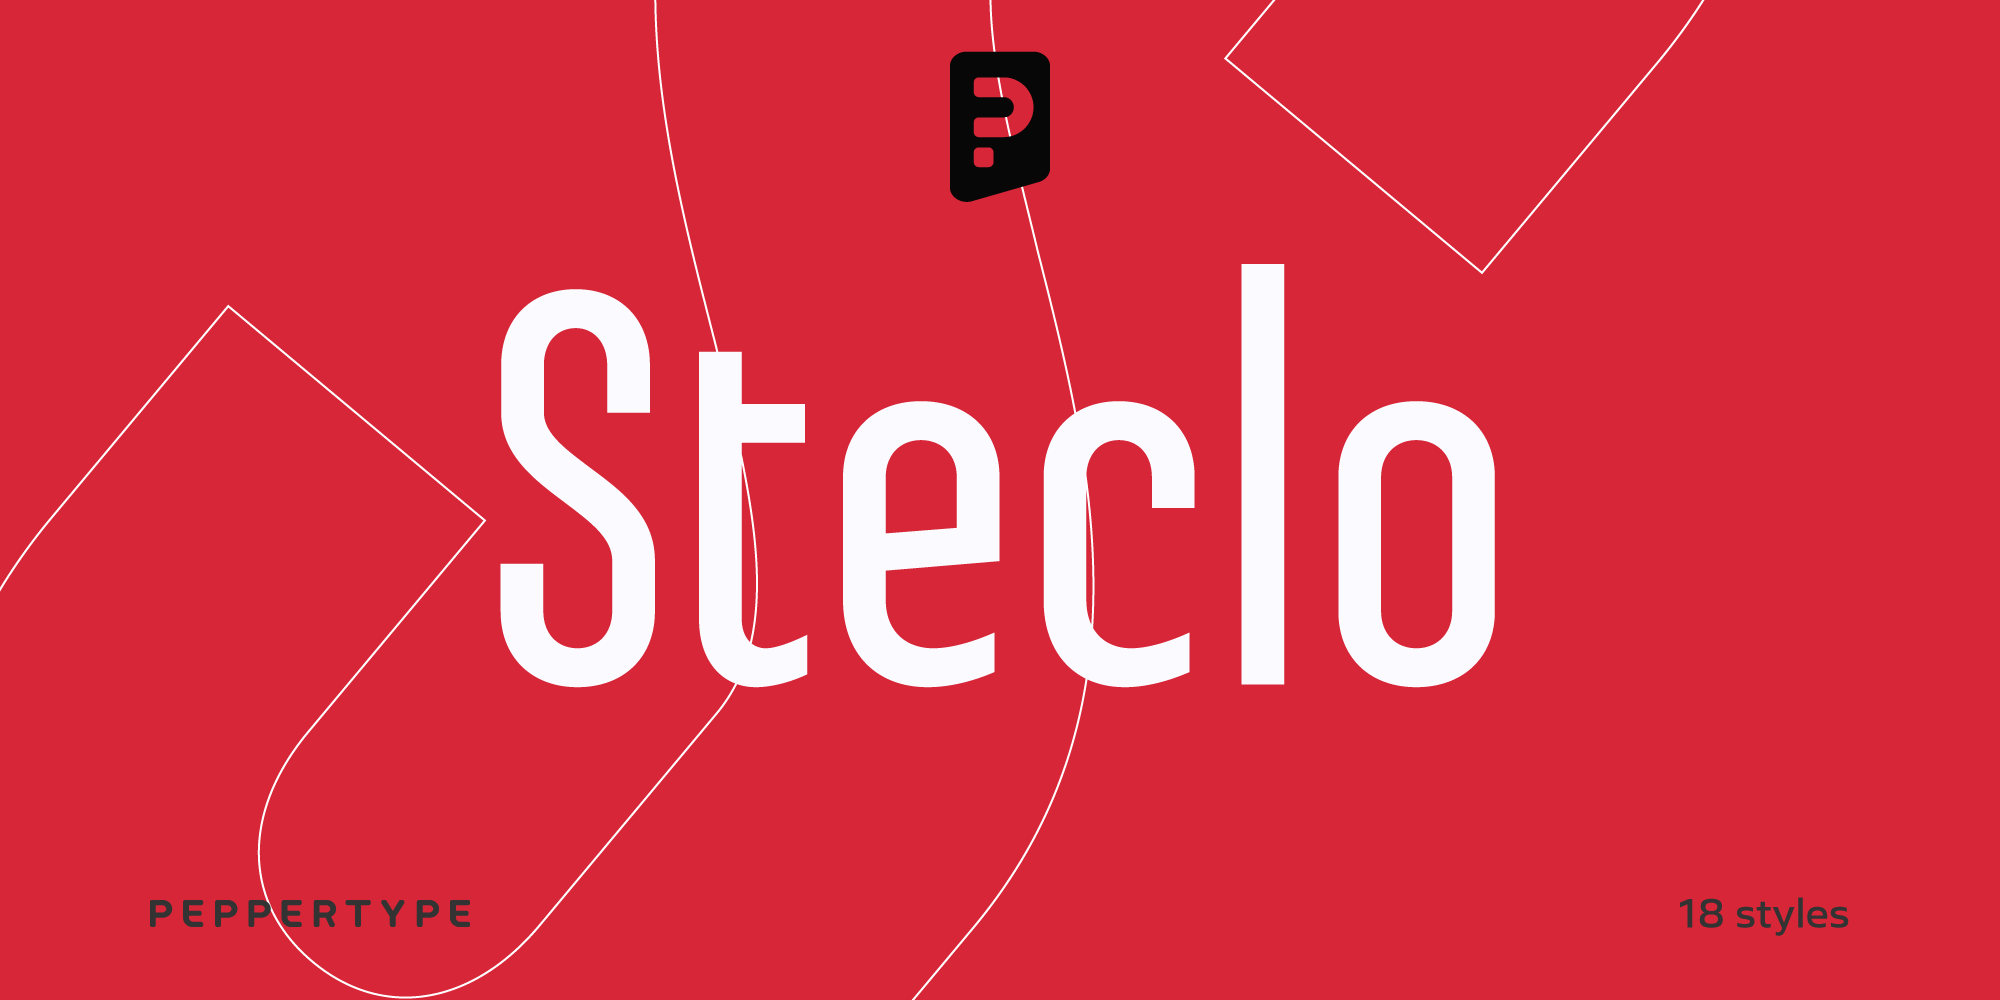 Steclo Typeface